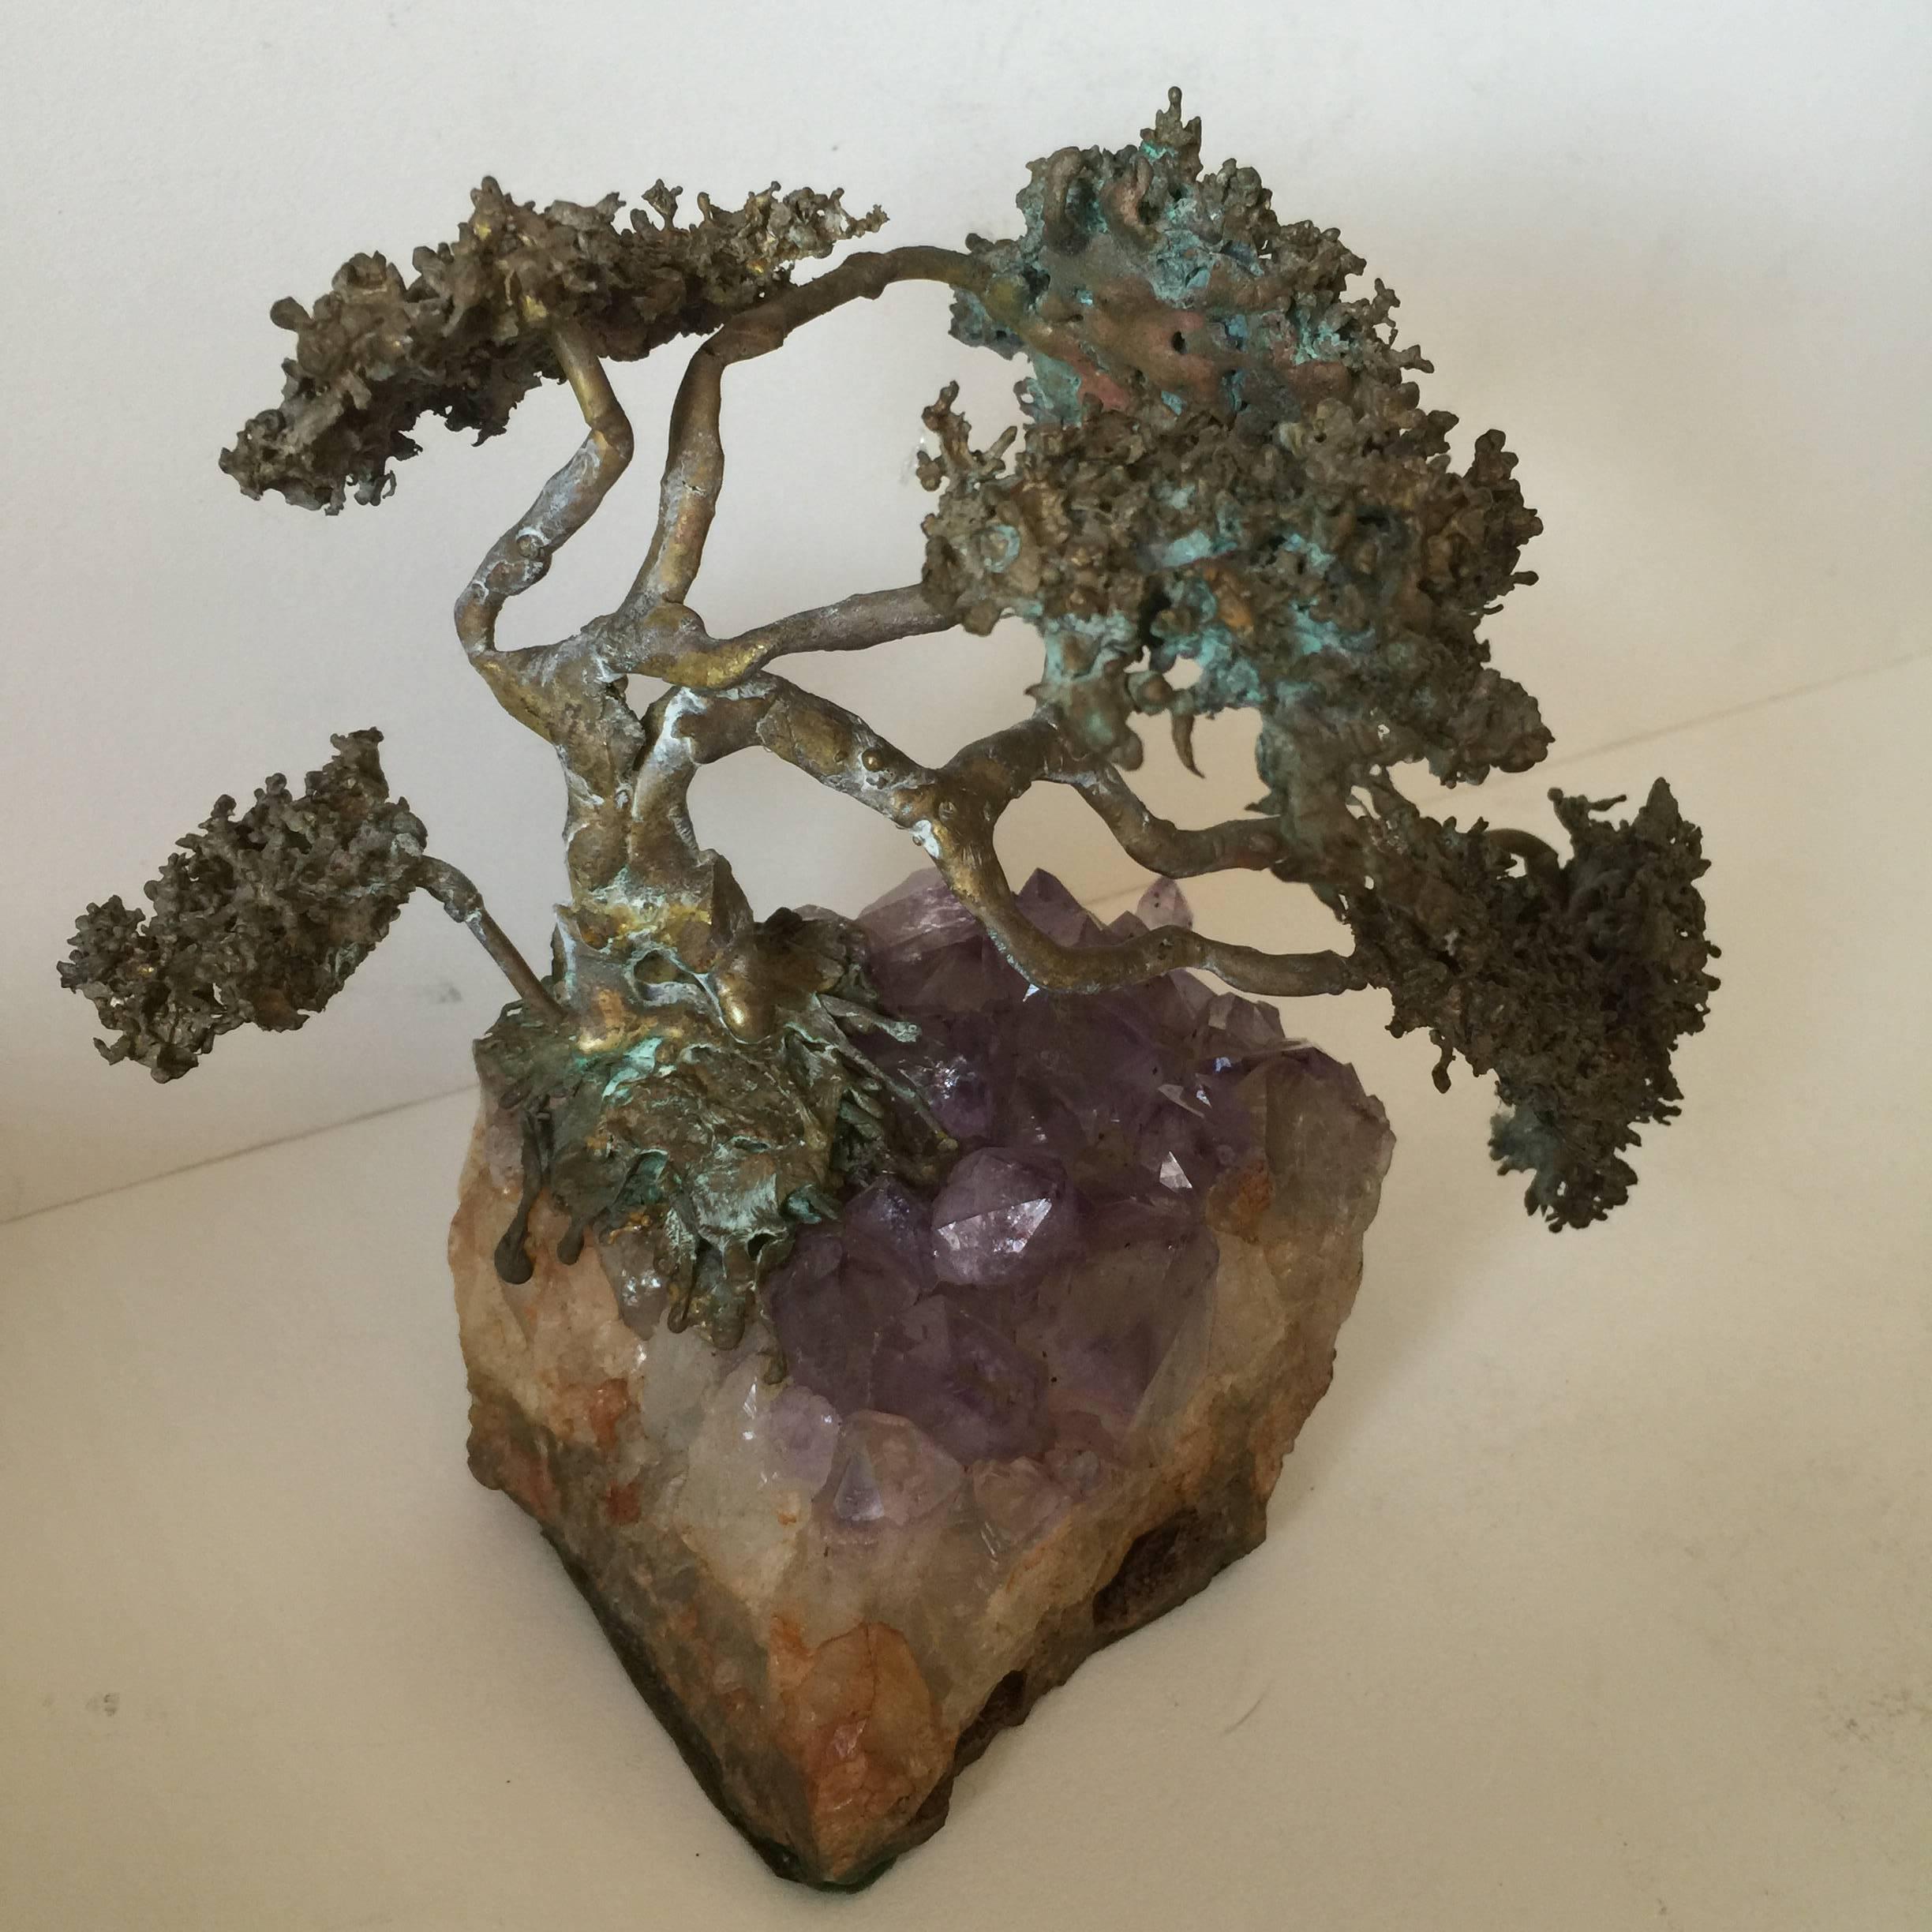 A metal Brutalist in style bonsai tree sculpture mounted on a 